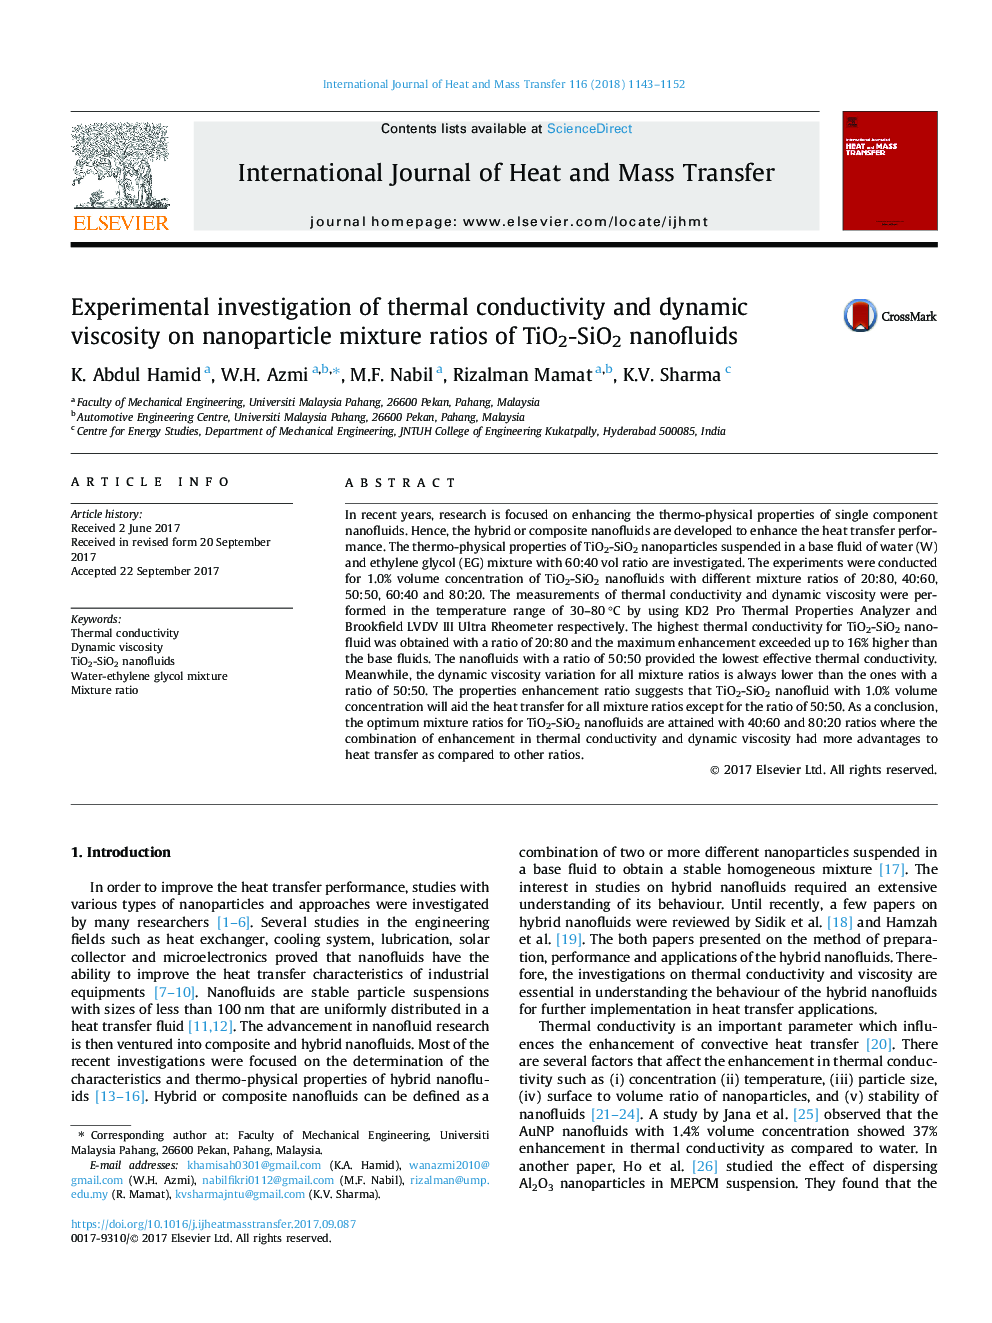 Experimental investigation of thermal conductivity and dynamic viscosity on nanoparticle mixture ratios of TiO2-SiO2 nanofluids